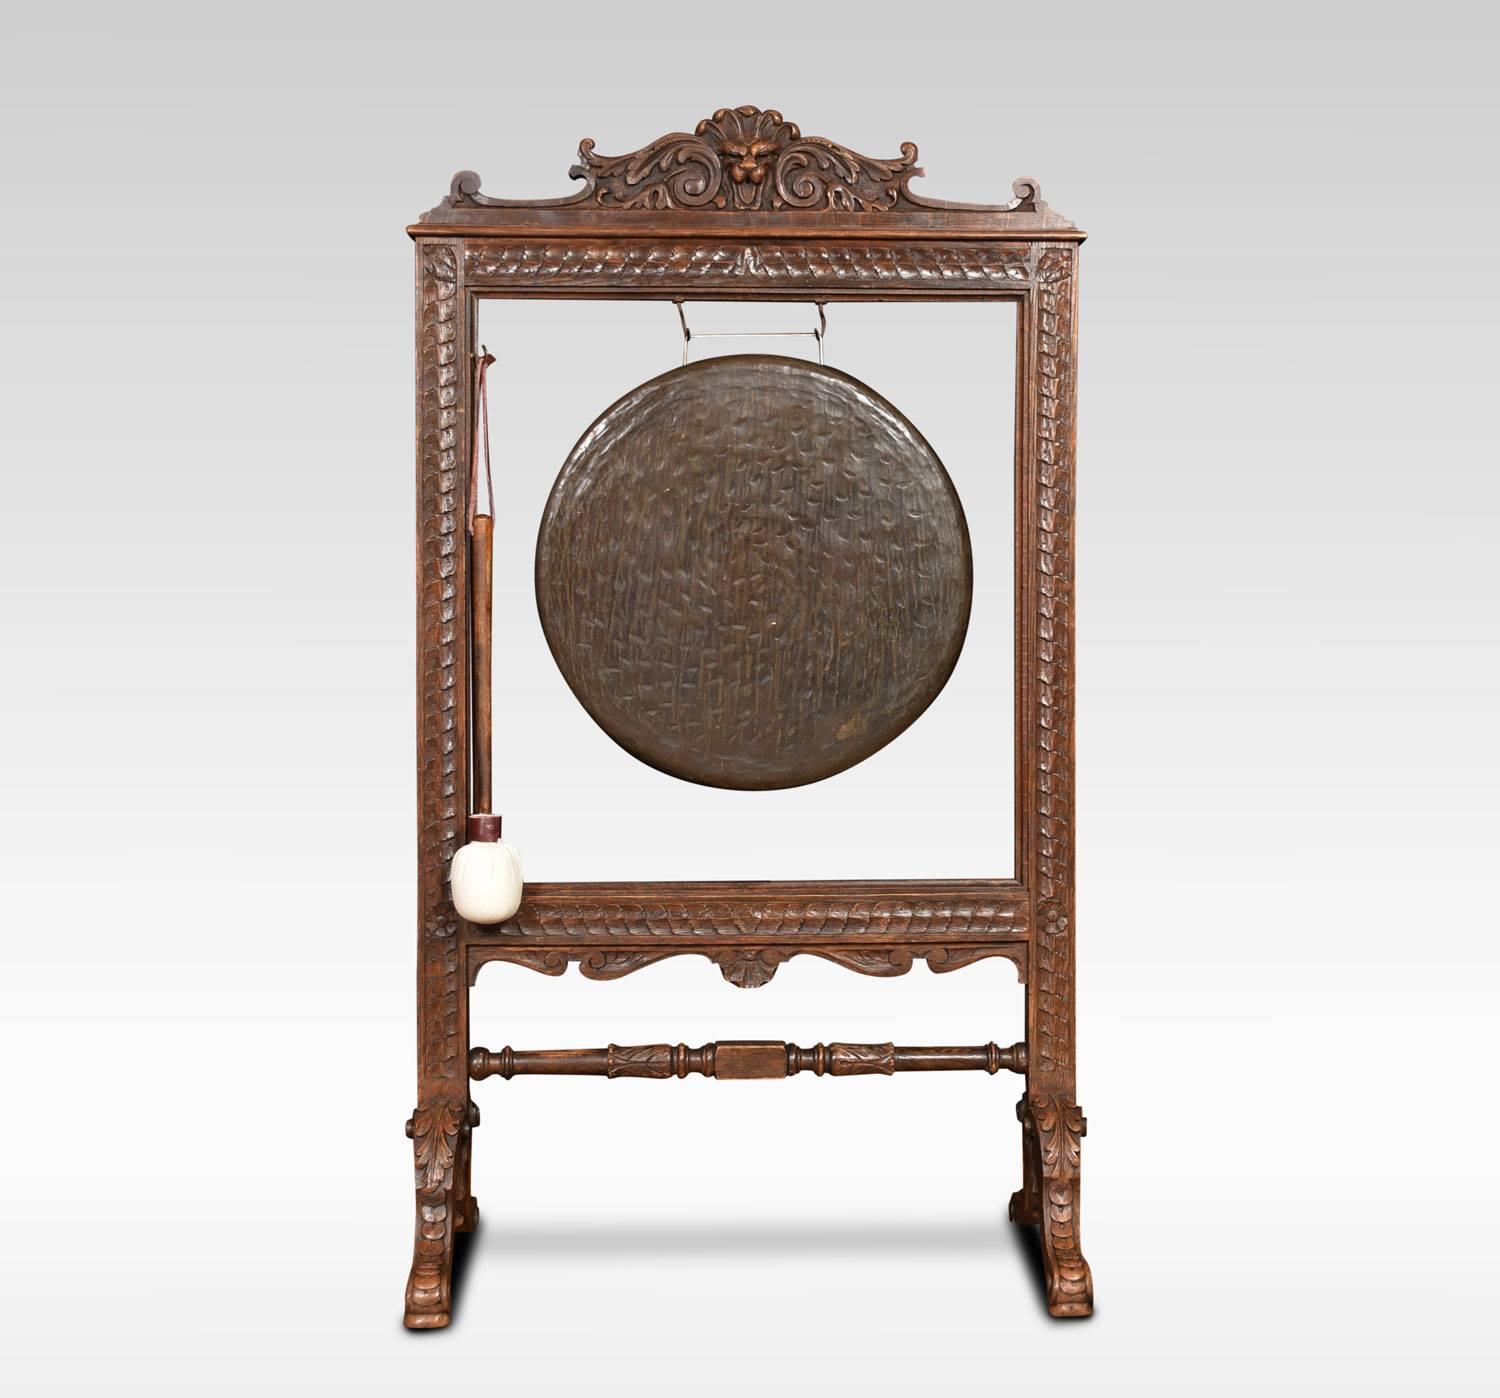 Late 19th century carved oak framed dinner gong, the circular gong within carved square frame having foliate scrolling crest and turned stretcher . All raised up on four splayed supports.
Dimensions
Height 48.5 Inches
Width 27.5 Inches
Depth